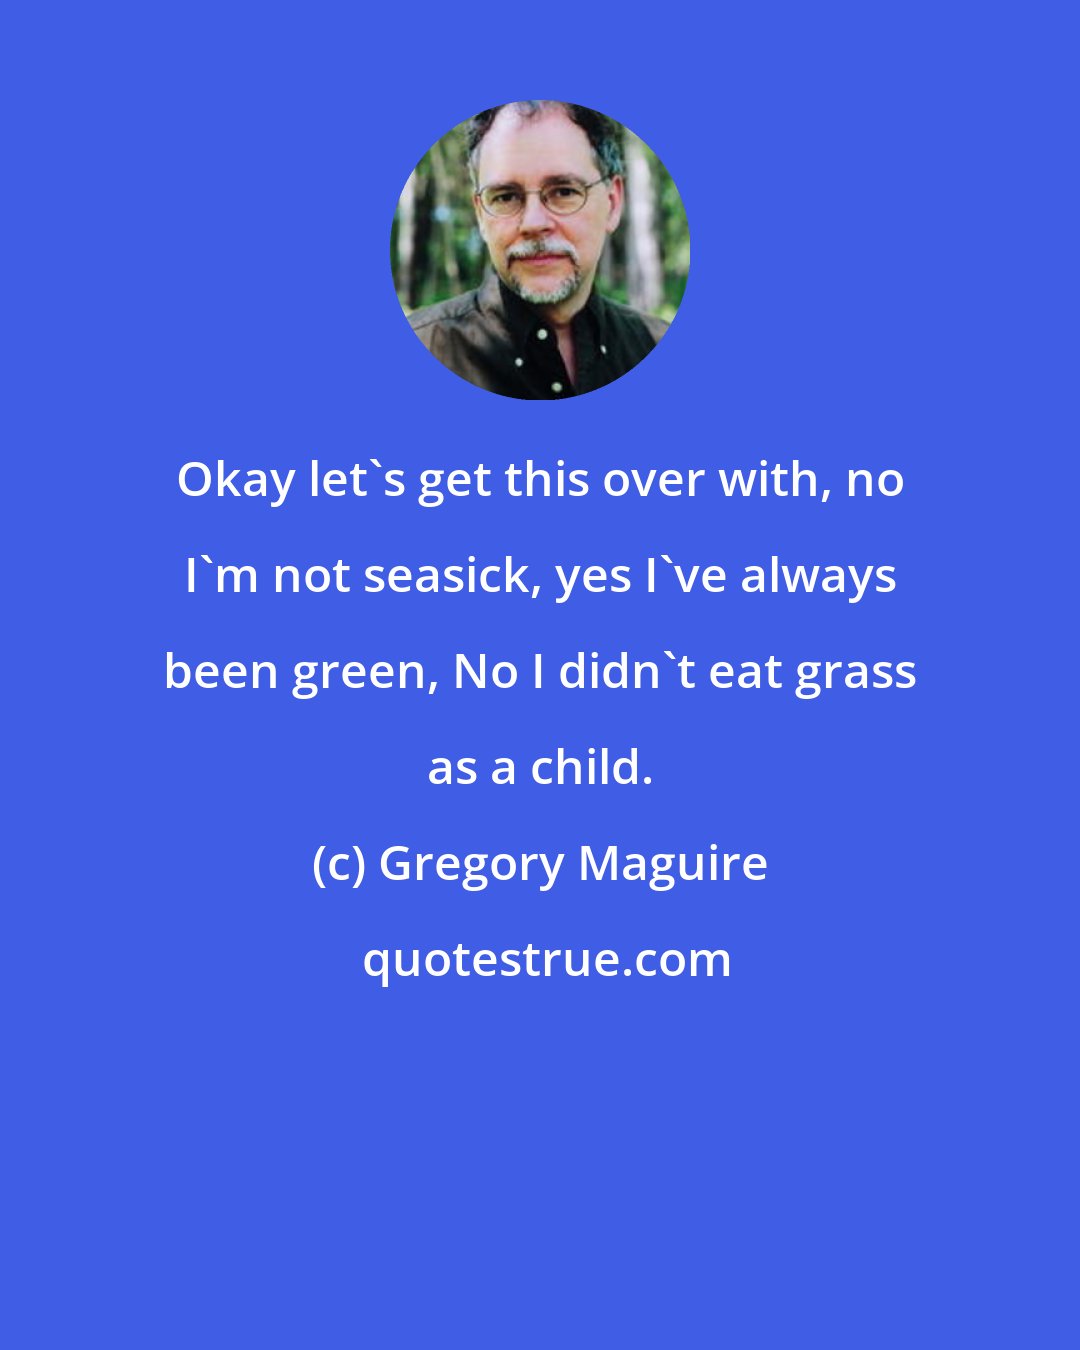 Gregory Maguire: Okay let's get this over with, no I'm not seasick, yes I've always been green, No I didn't eat grass as a child.